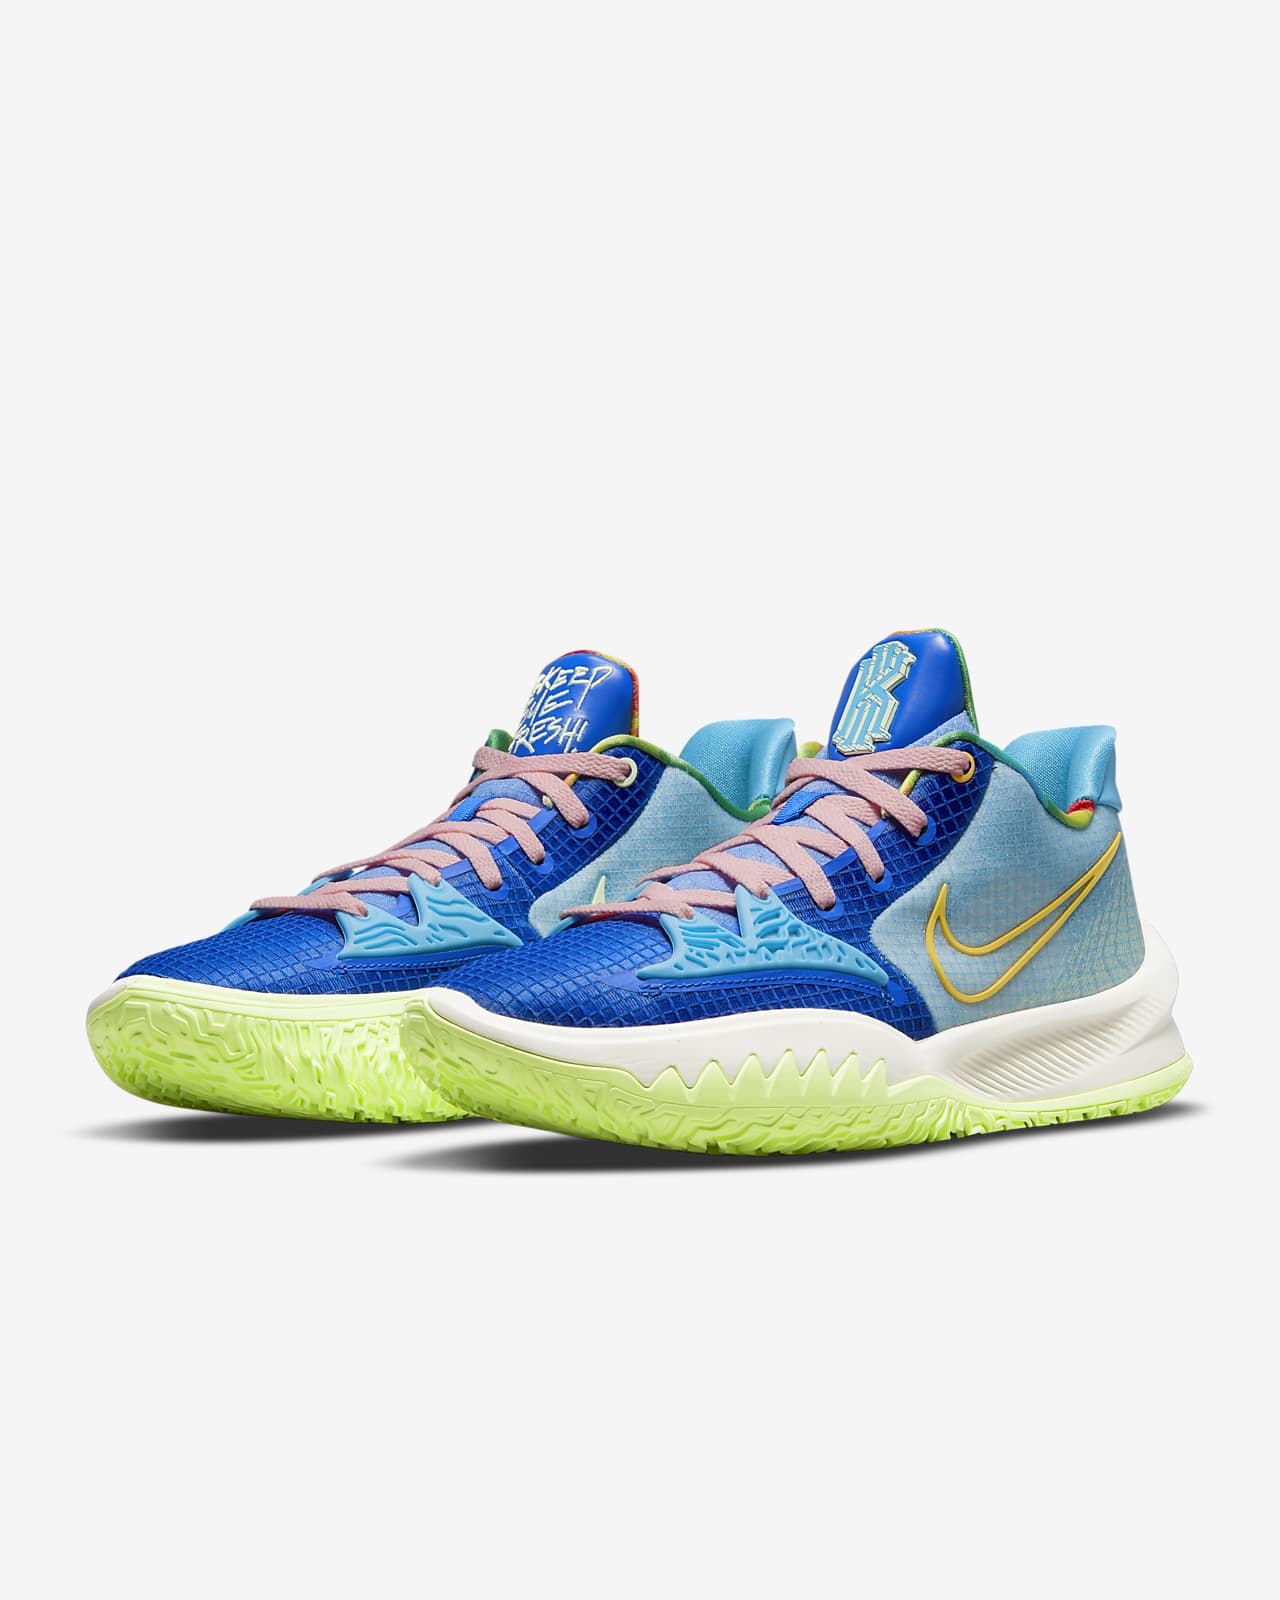 NIKE Kyrie low 4 EP